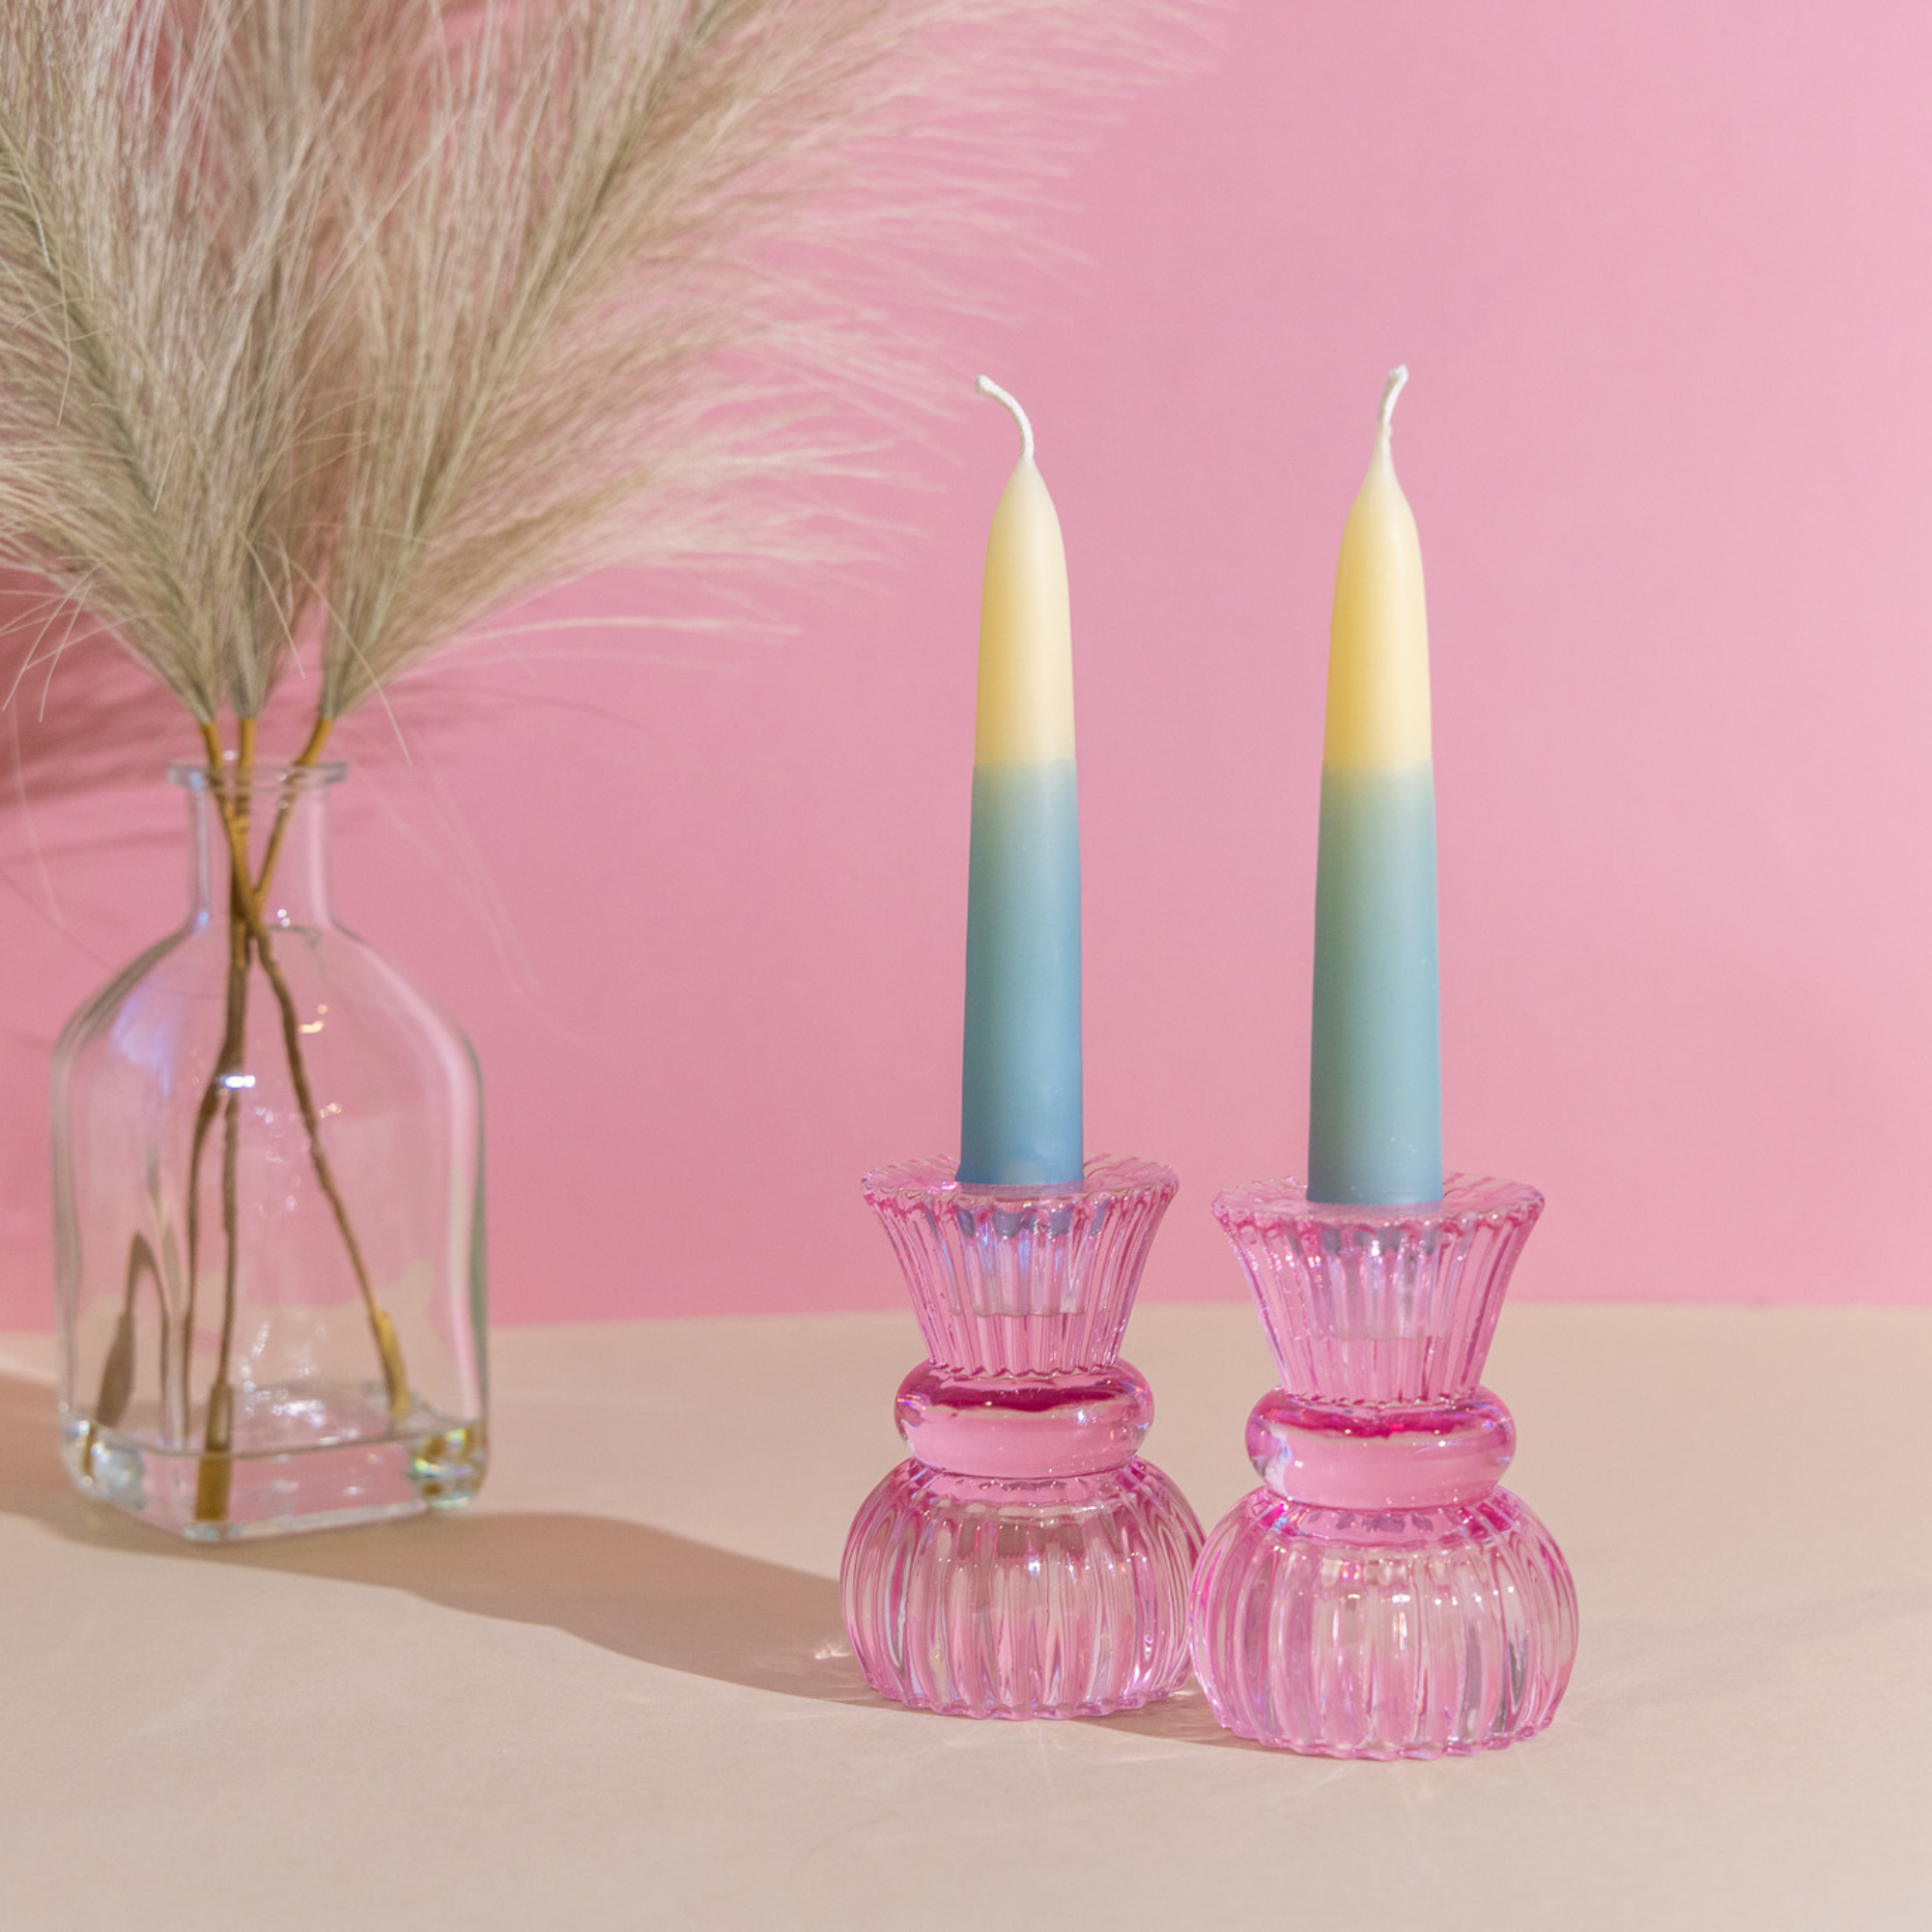 Two Sided Glass Candle Holders - Blush